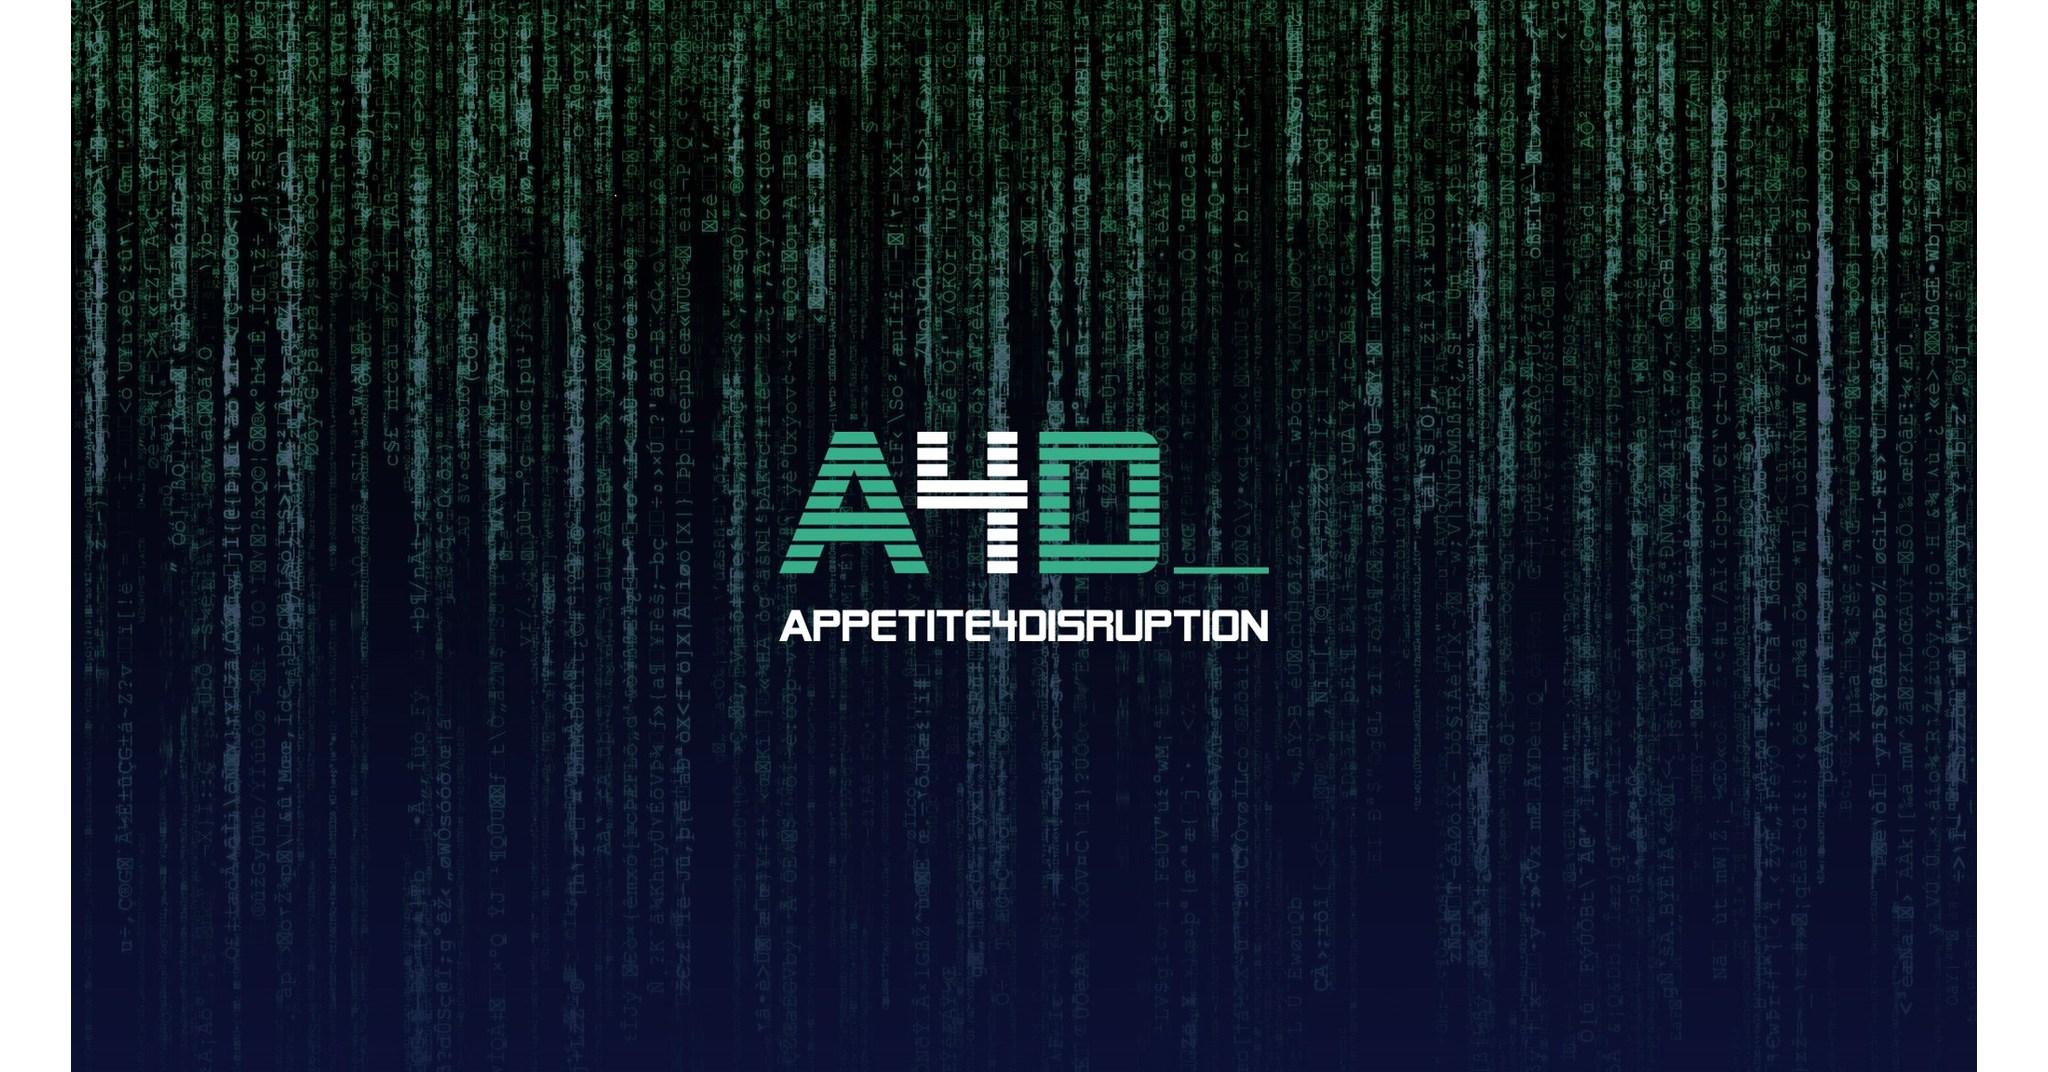 Appetite For Disruption The First Reality Show On The Blockchain Selects Young Entrepreneurs To Finance And Follow On Camera